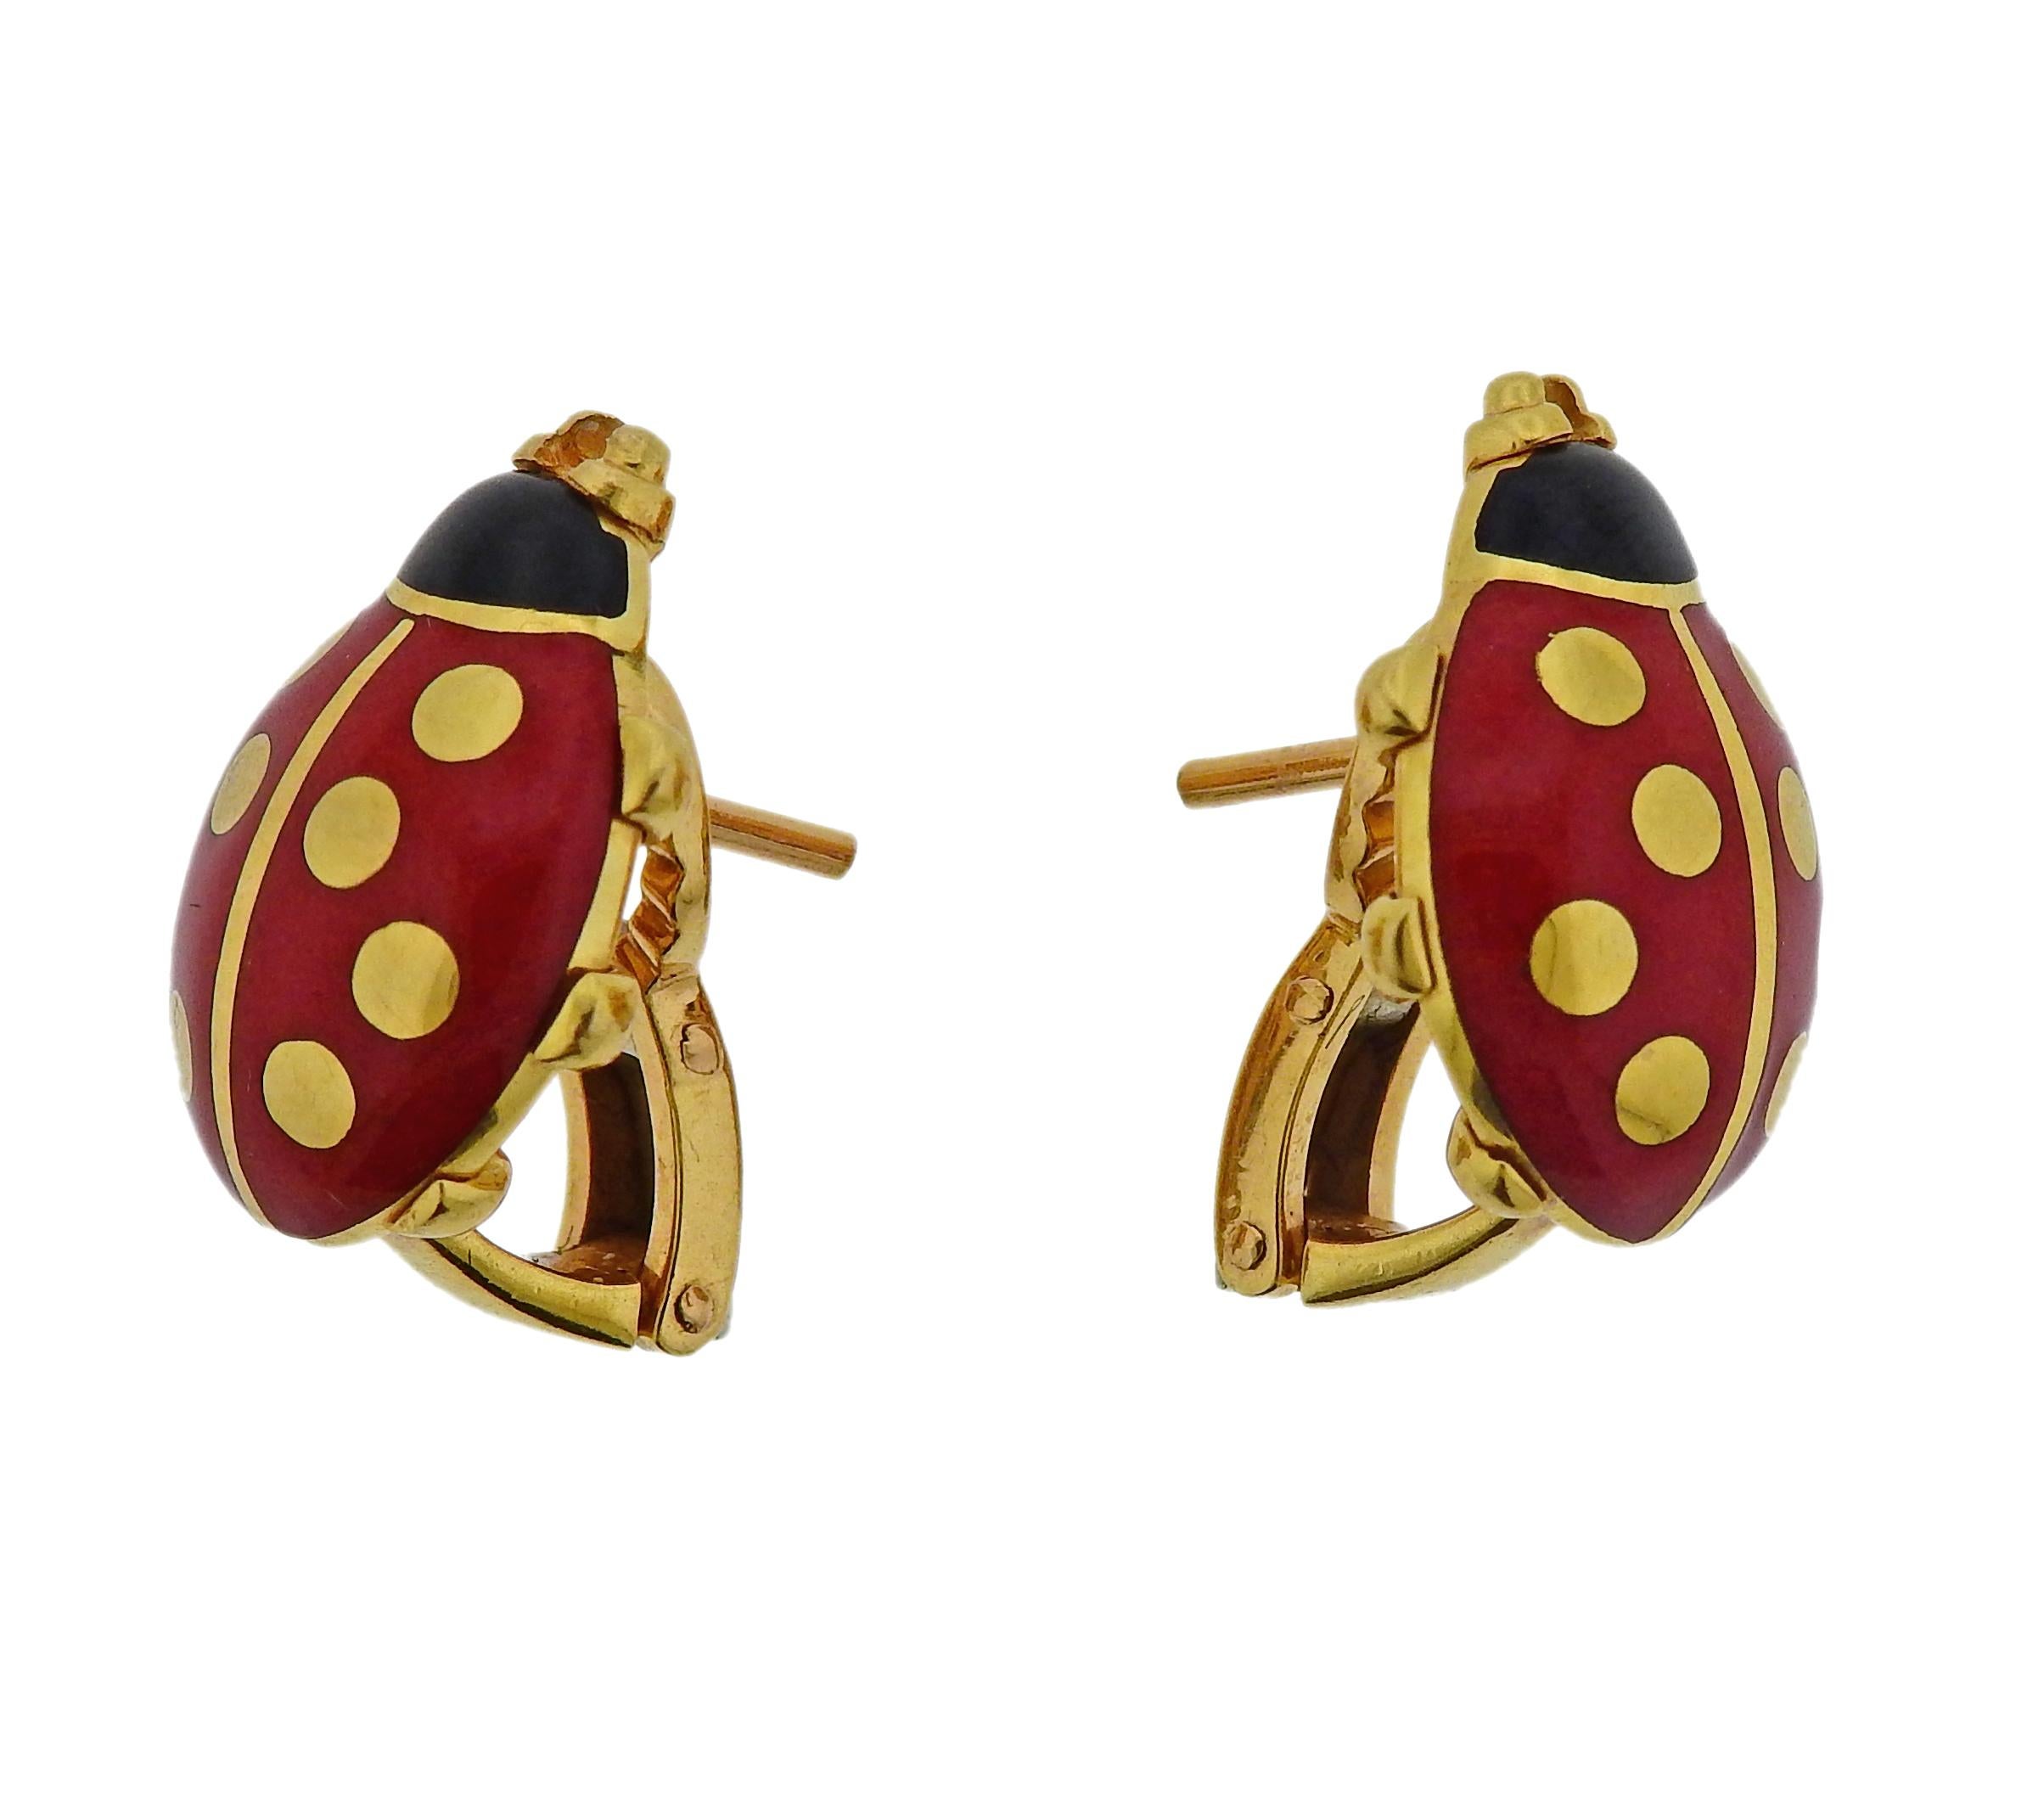 Adorable ladybug earrings by Cartier, set in 18k yellow gold with enamel. Earrings are 17mm x 13mm. Weigh 10.3 grams. Marked: Cartier, B45606, 1990, 750.